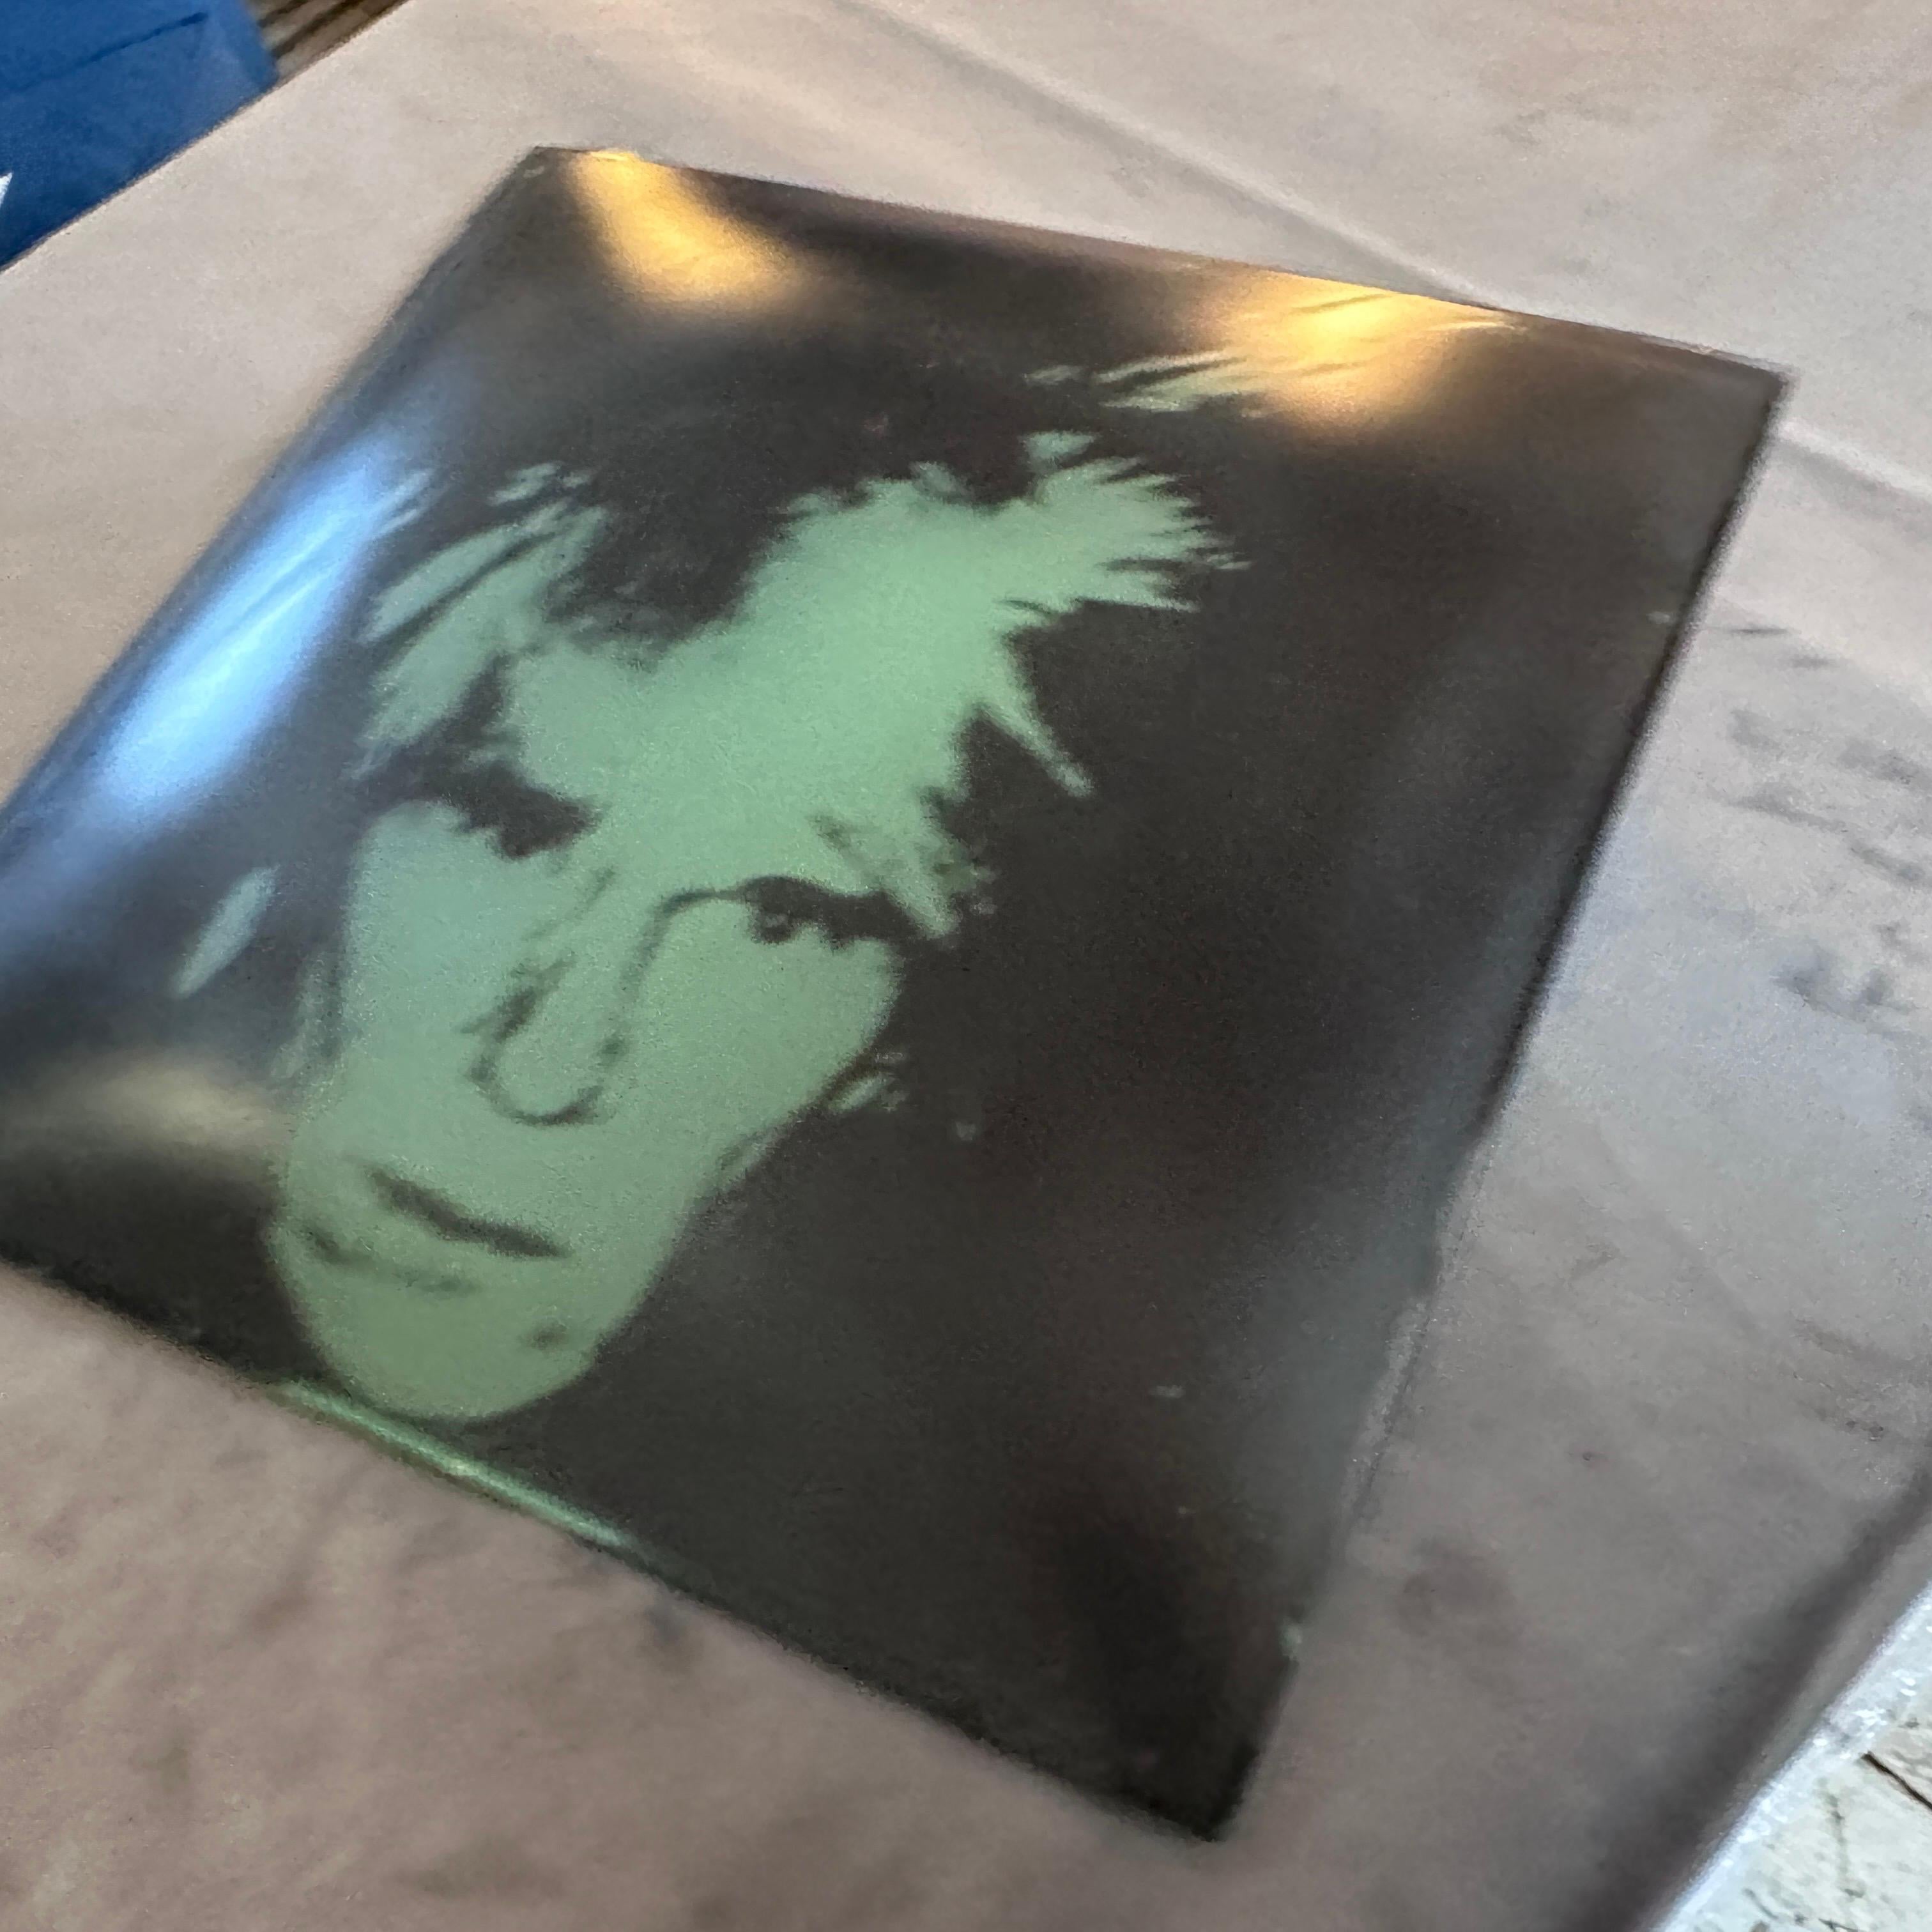 1990s Pop Art Andy Warhol Self Portrait Square Glass Tray by Rosenthal In Good Condition For Sale In Aci Castello, IT